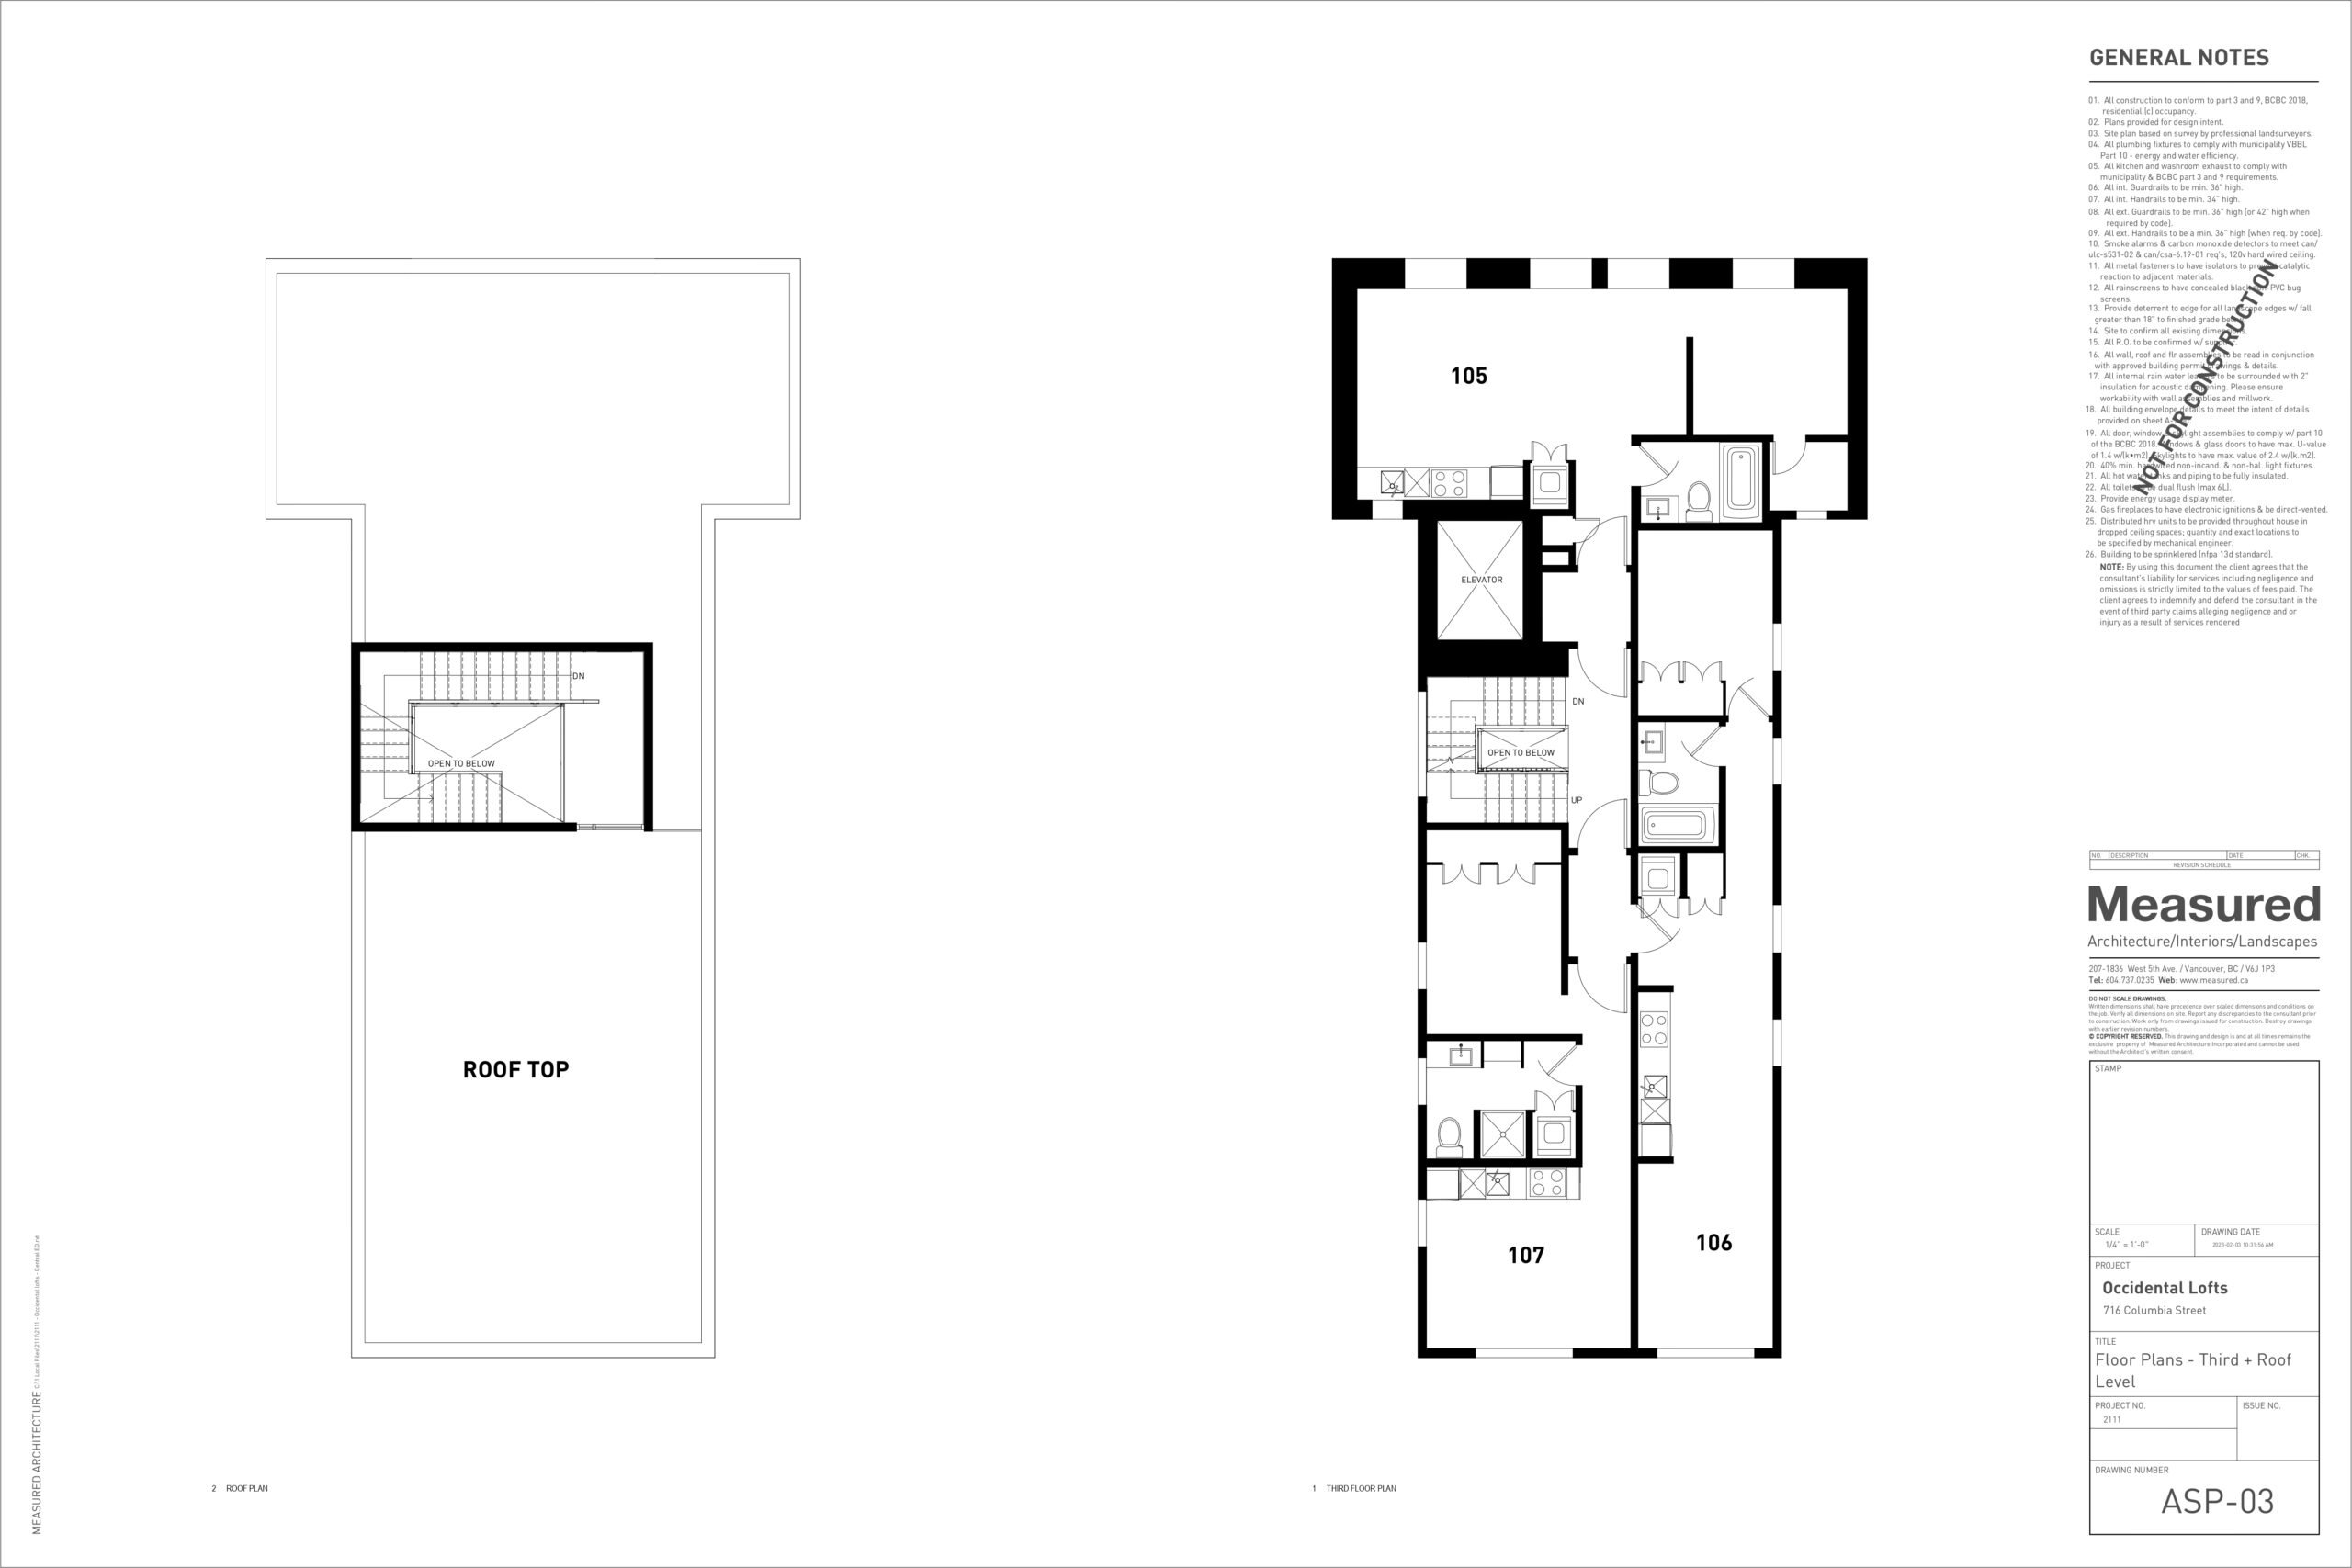 ASP-03 - Floor Plans - Third + Roof Level_pages-to-jpg-0001